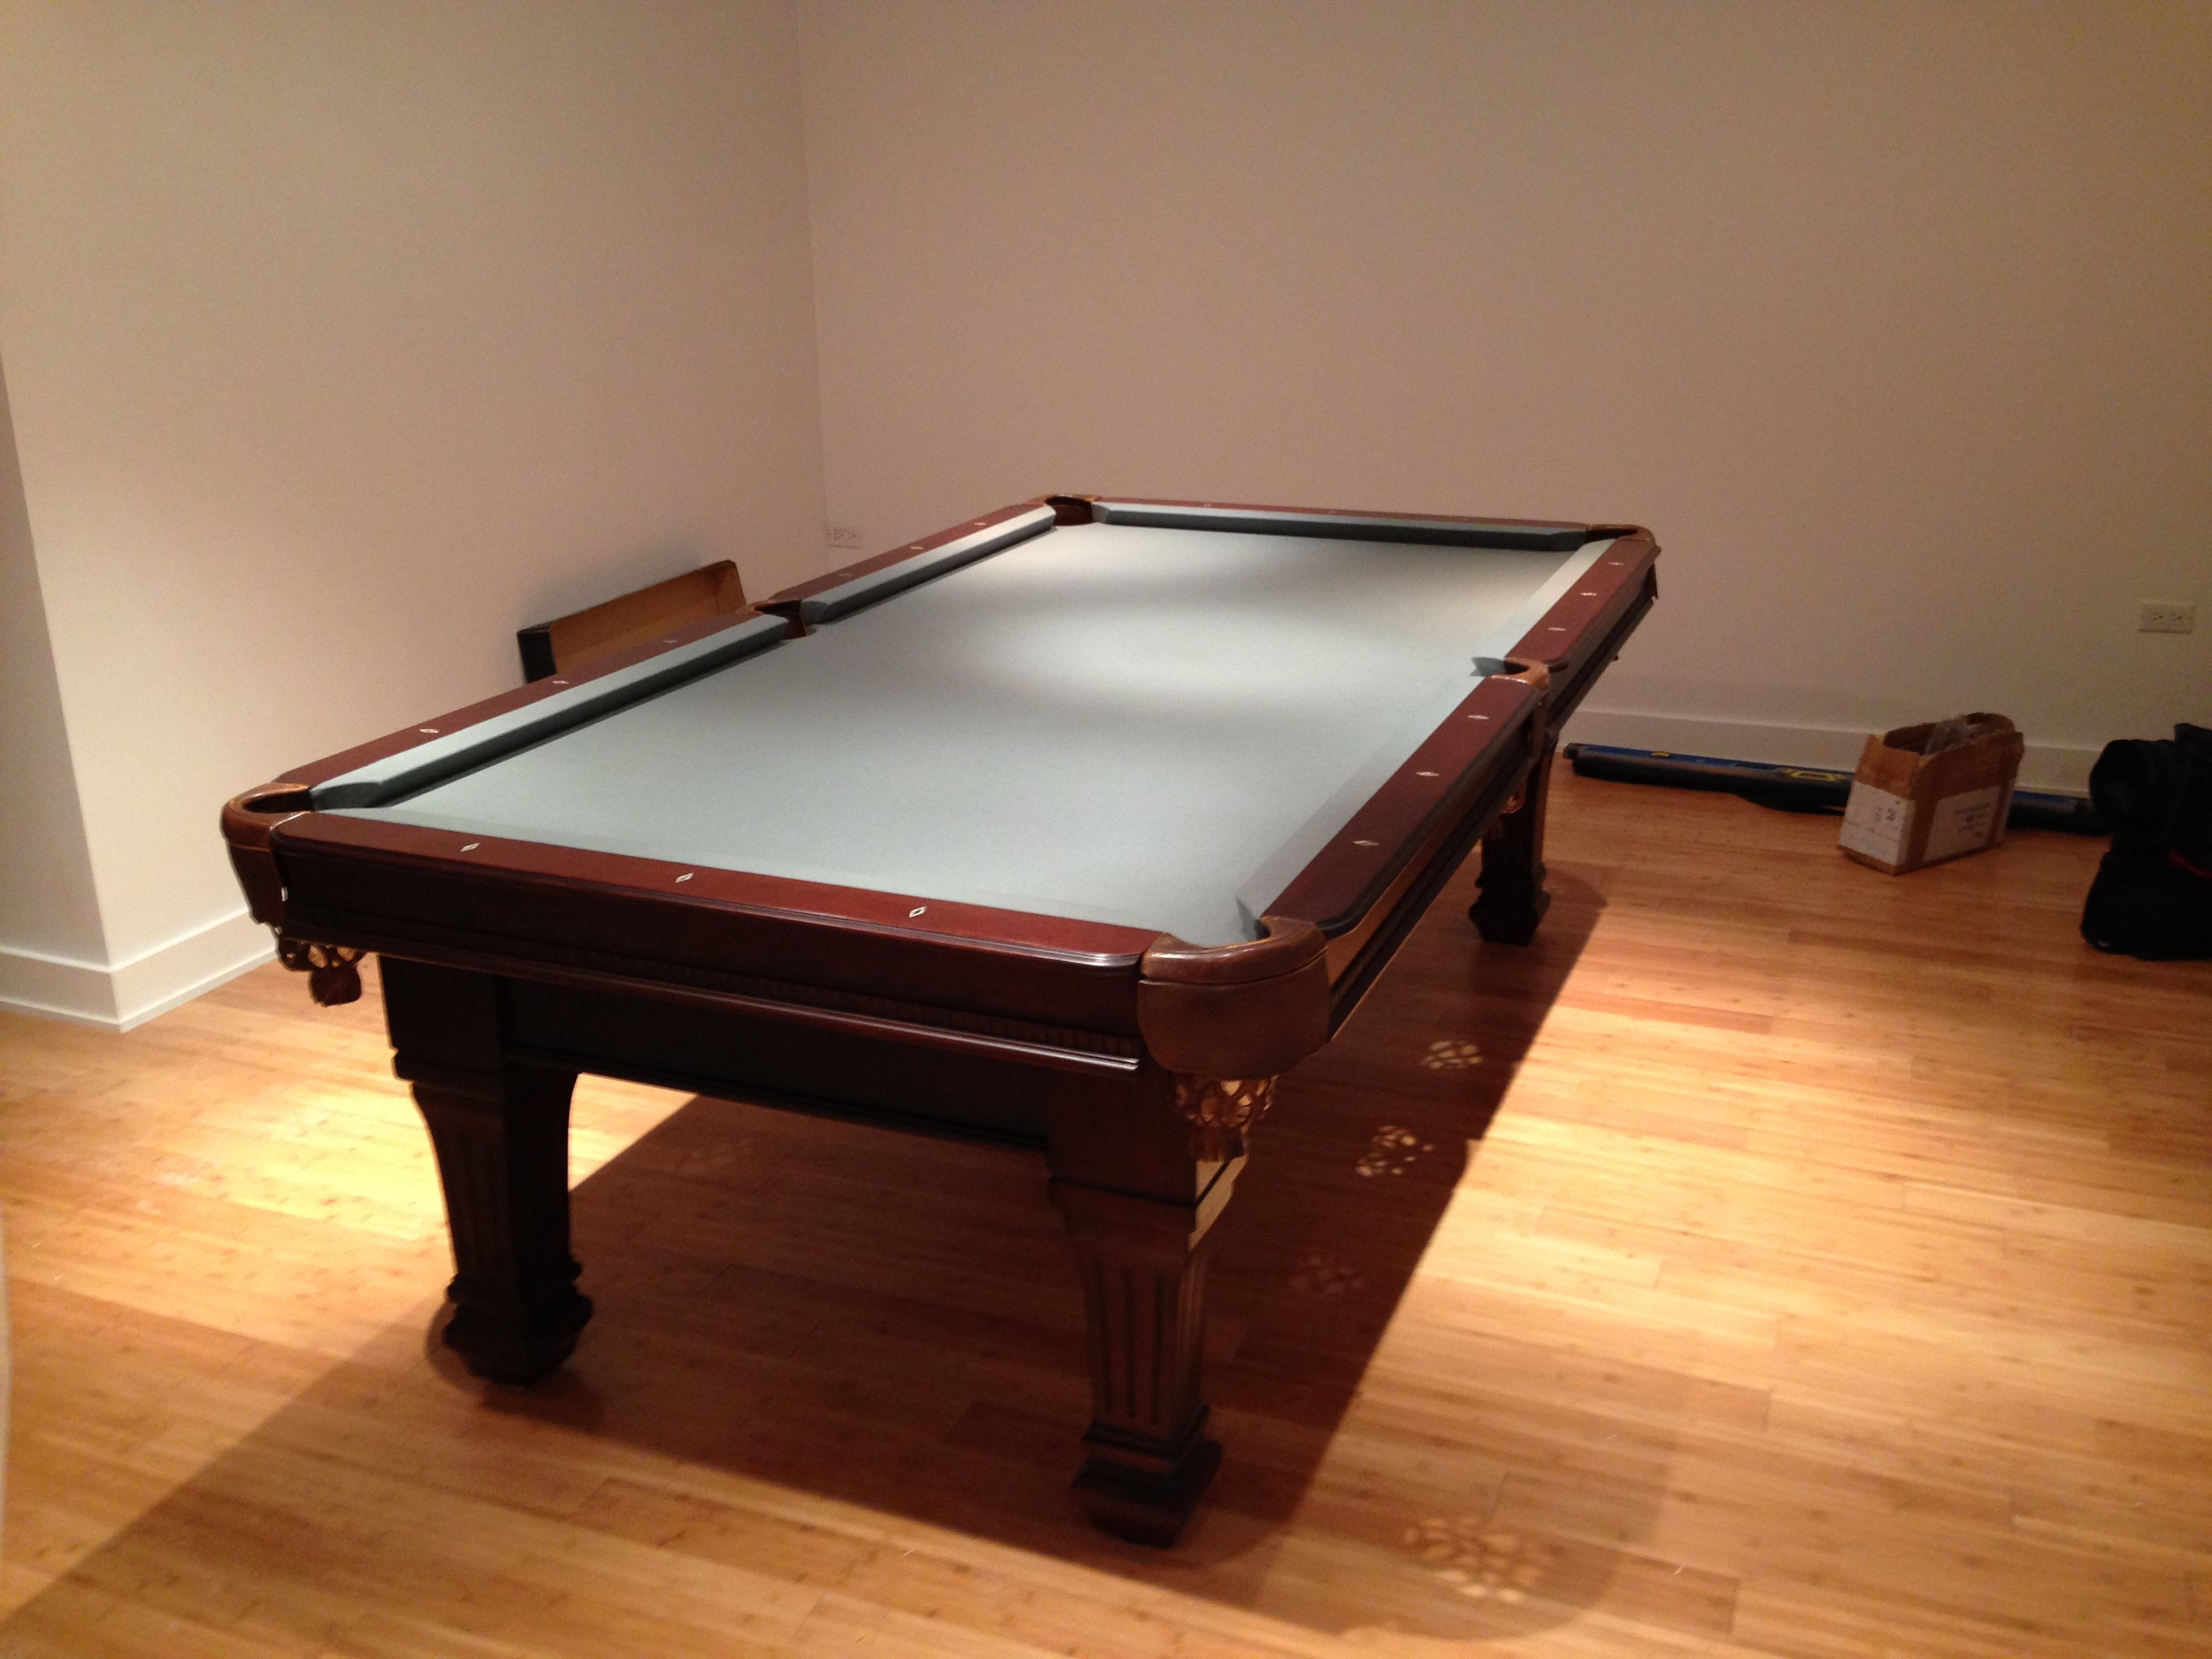 olhausen pool table assembly instructions